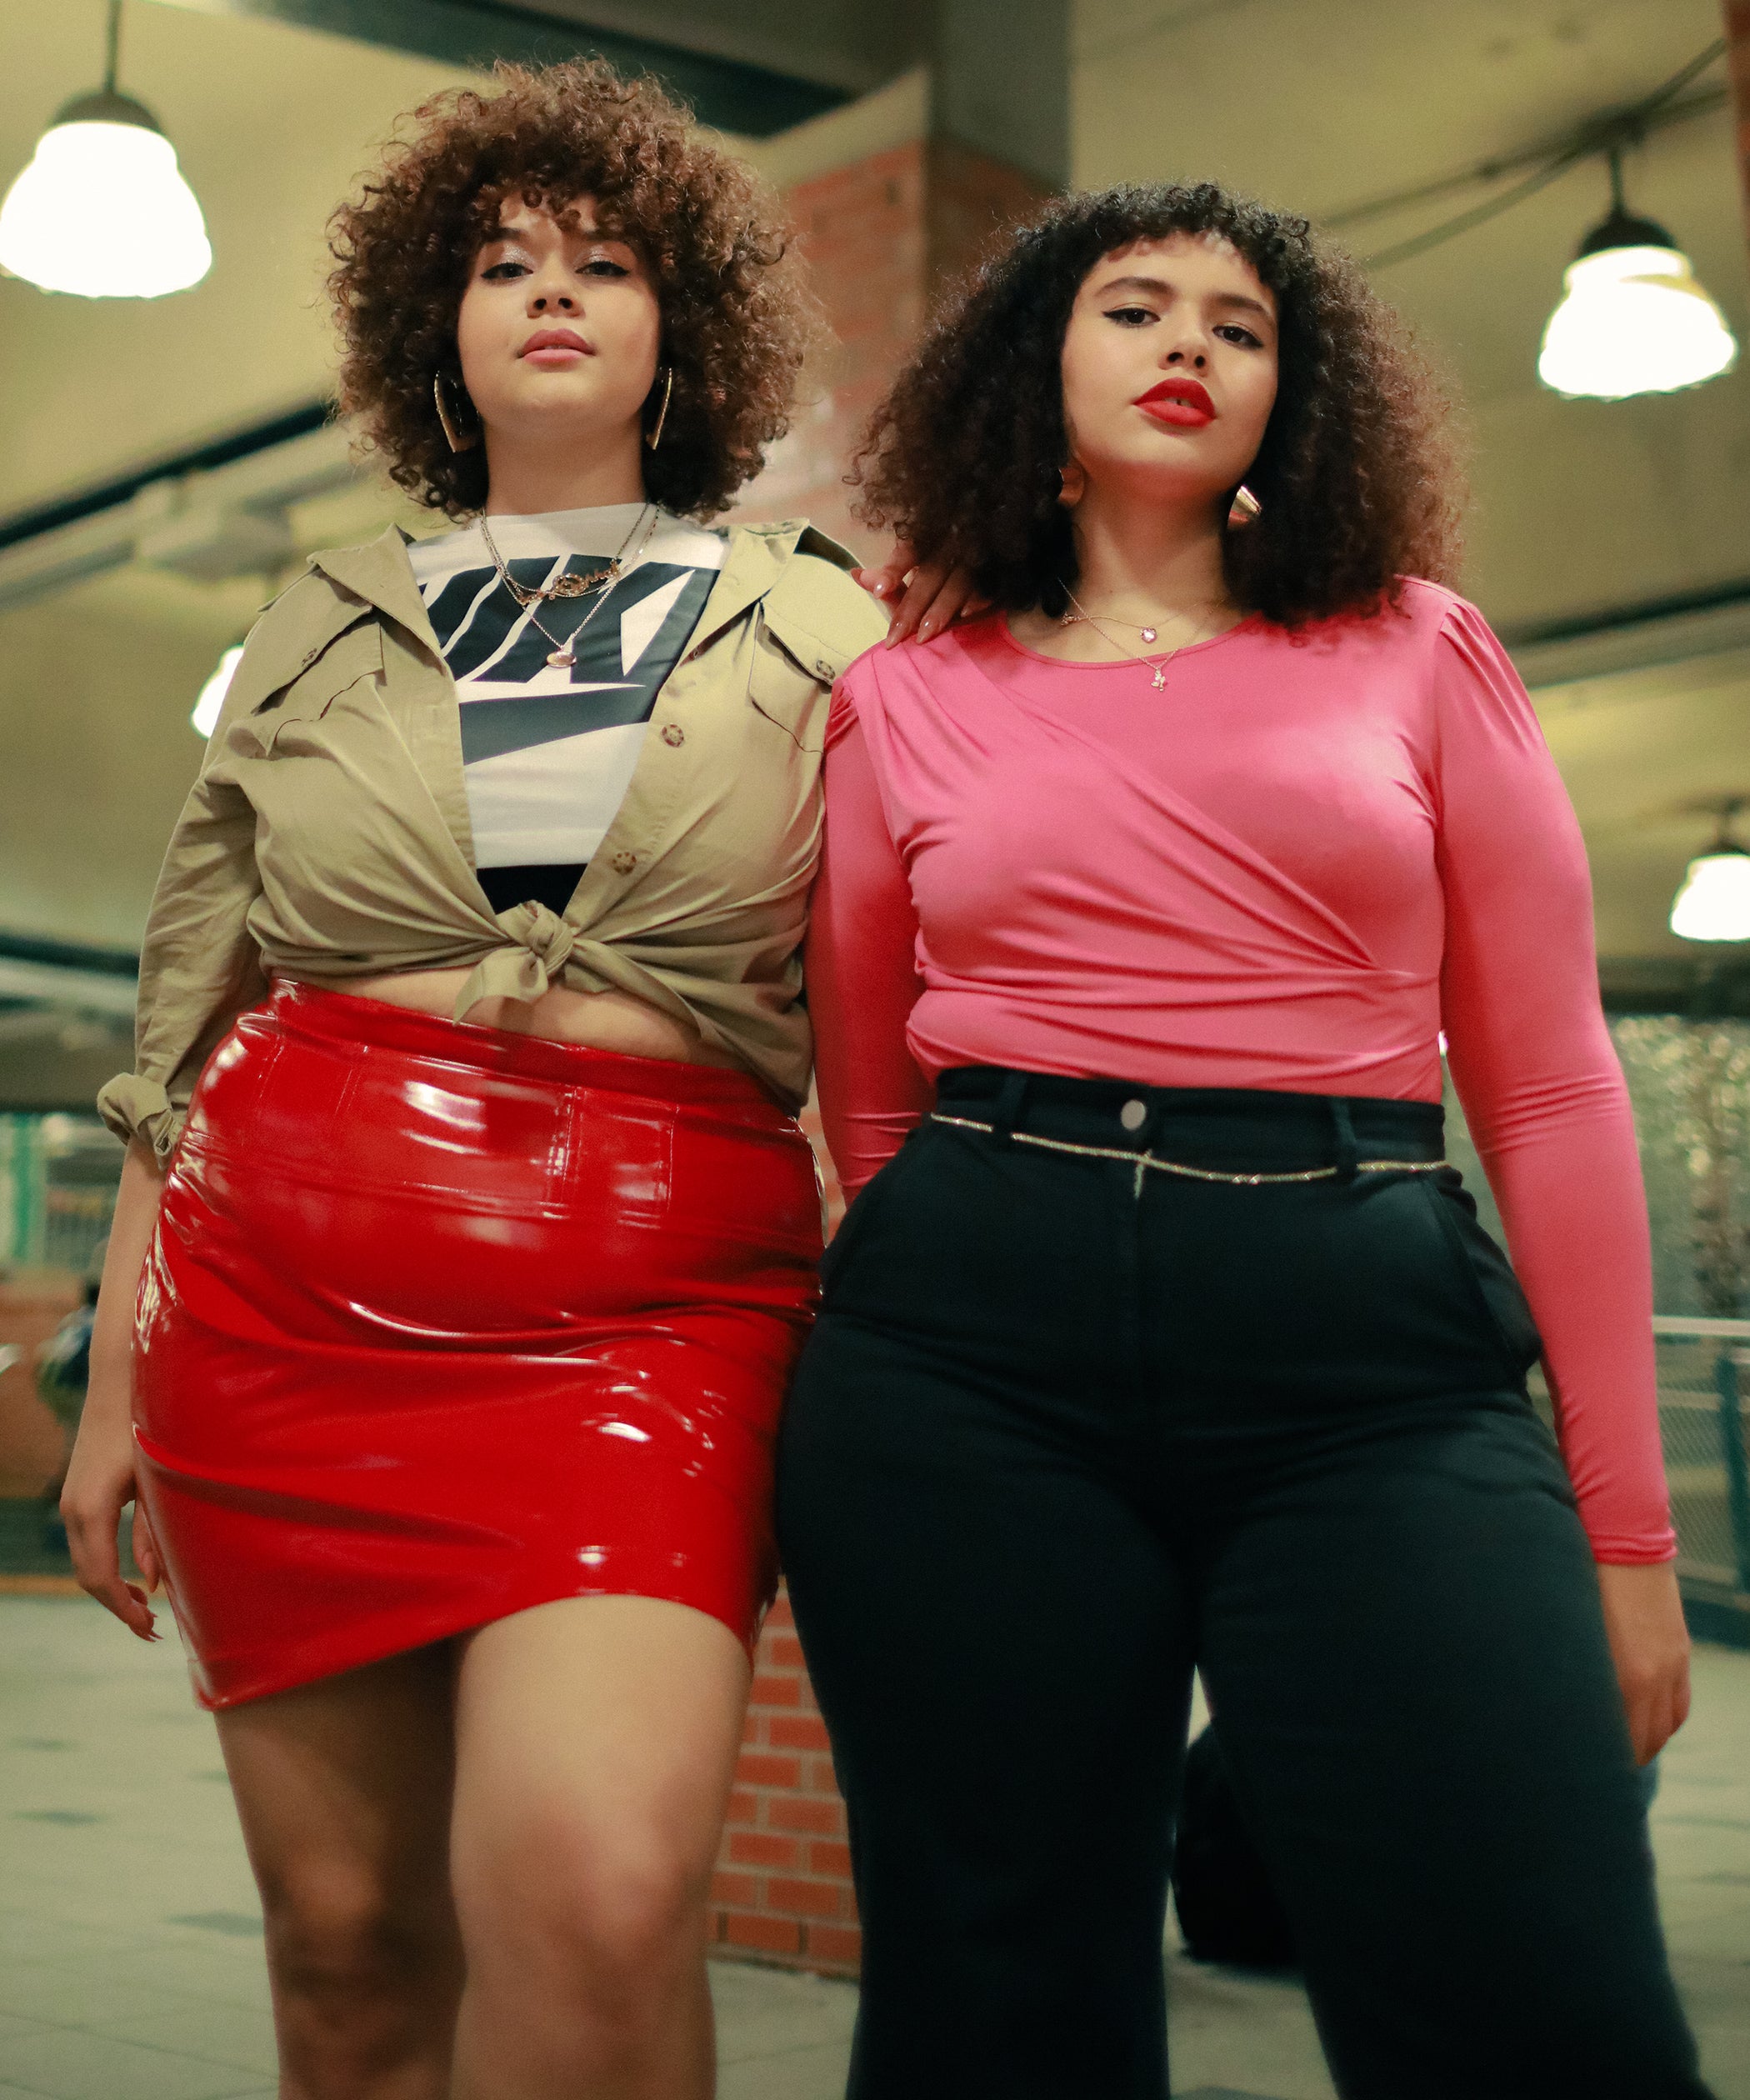 While some retailers are investing in plus-size apparel, others